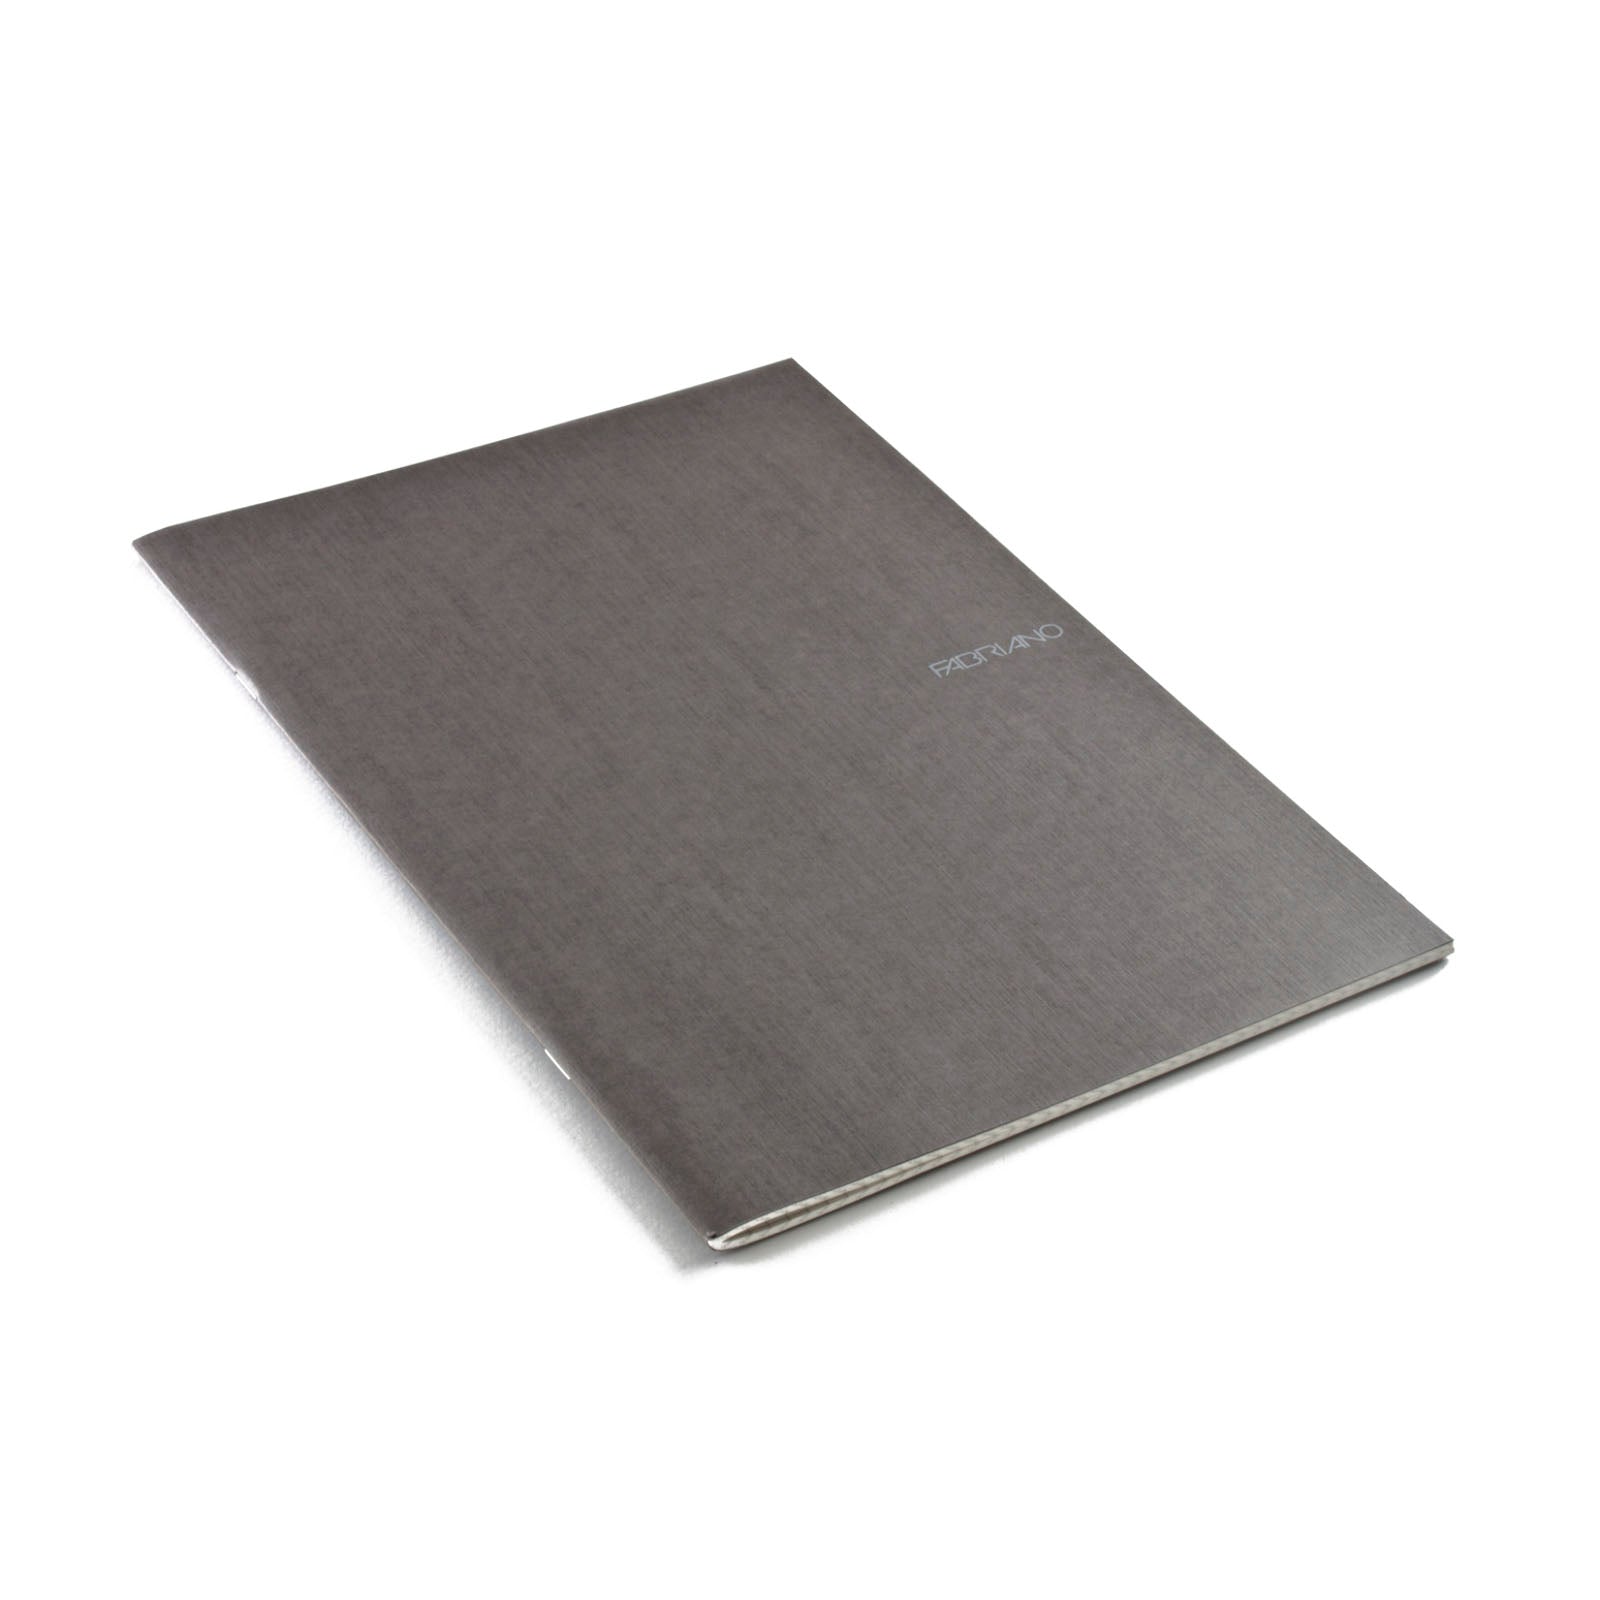 Fabriano EcoQua Notebook Large Staple-Bound Lined 38 Sheets Stone